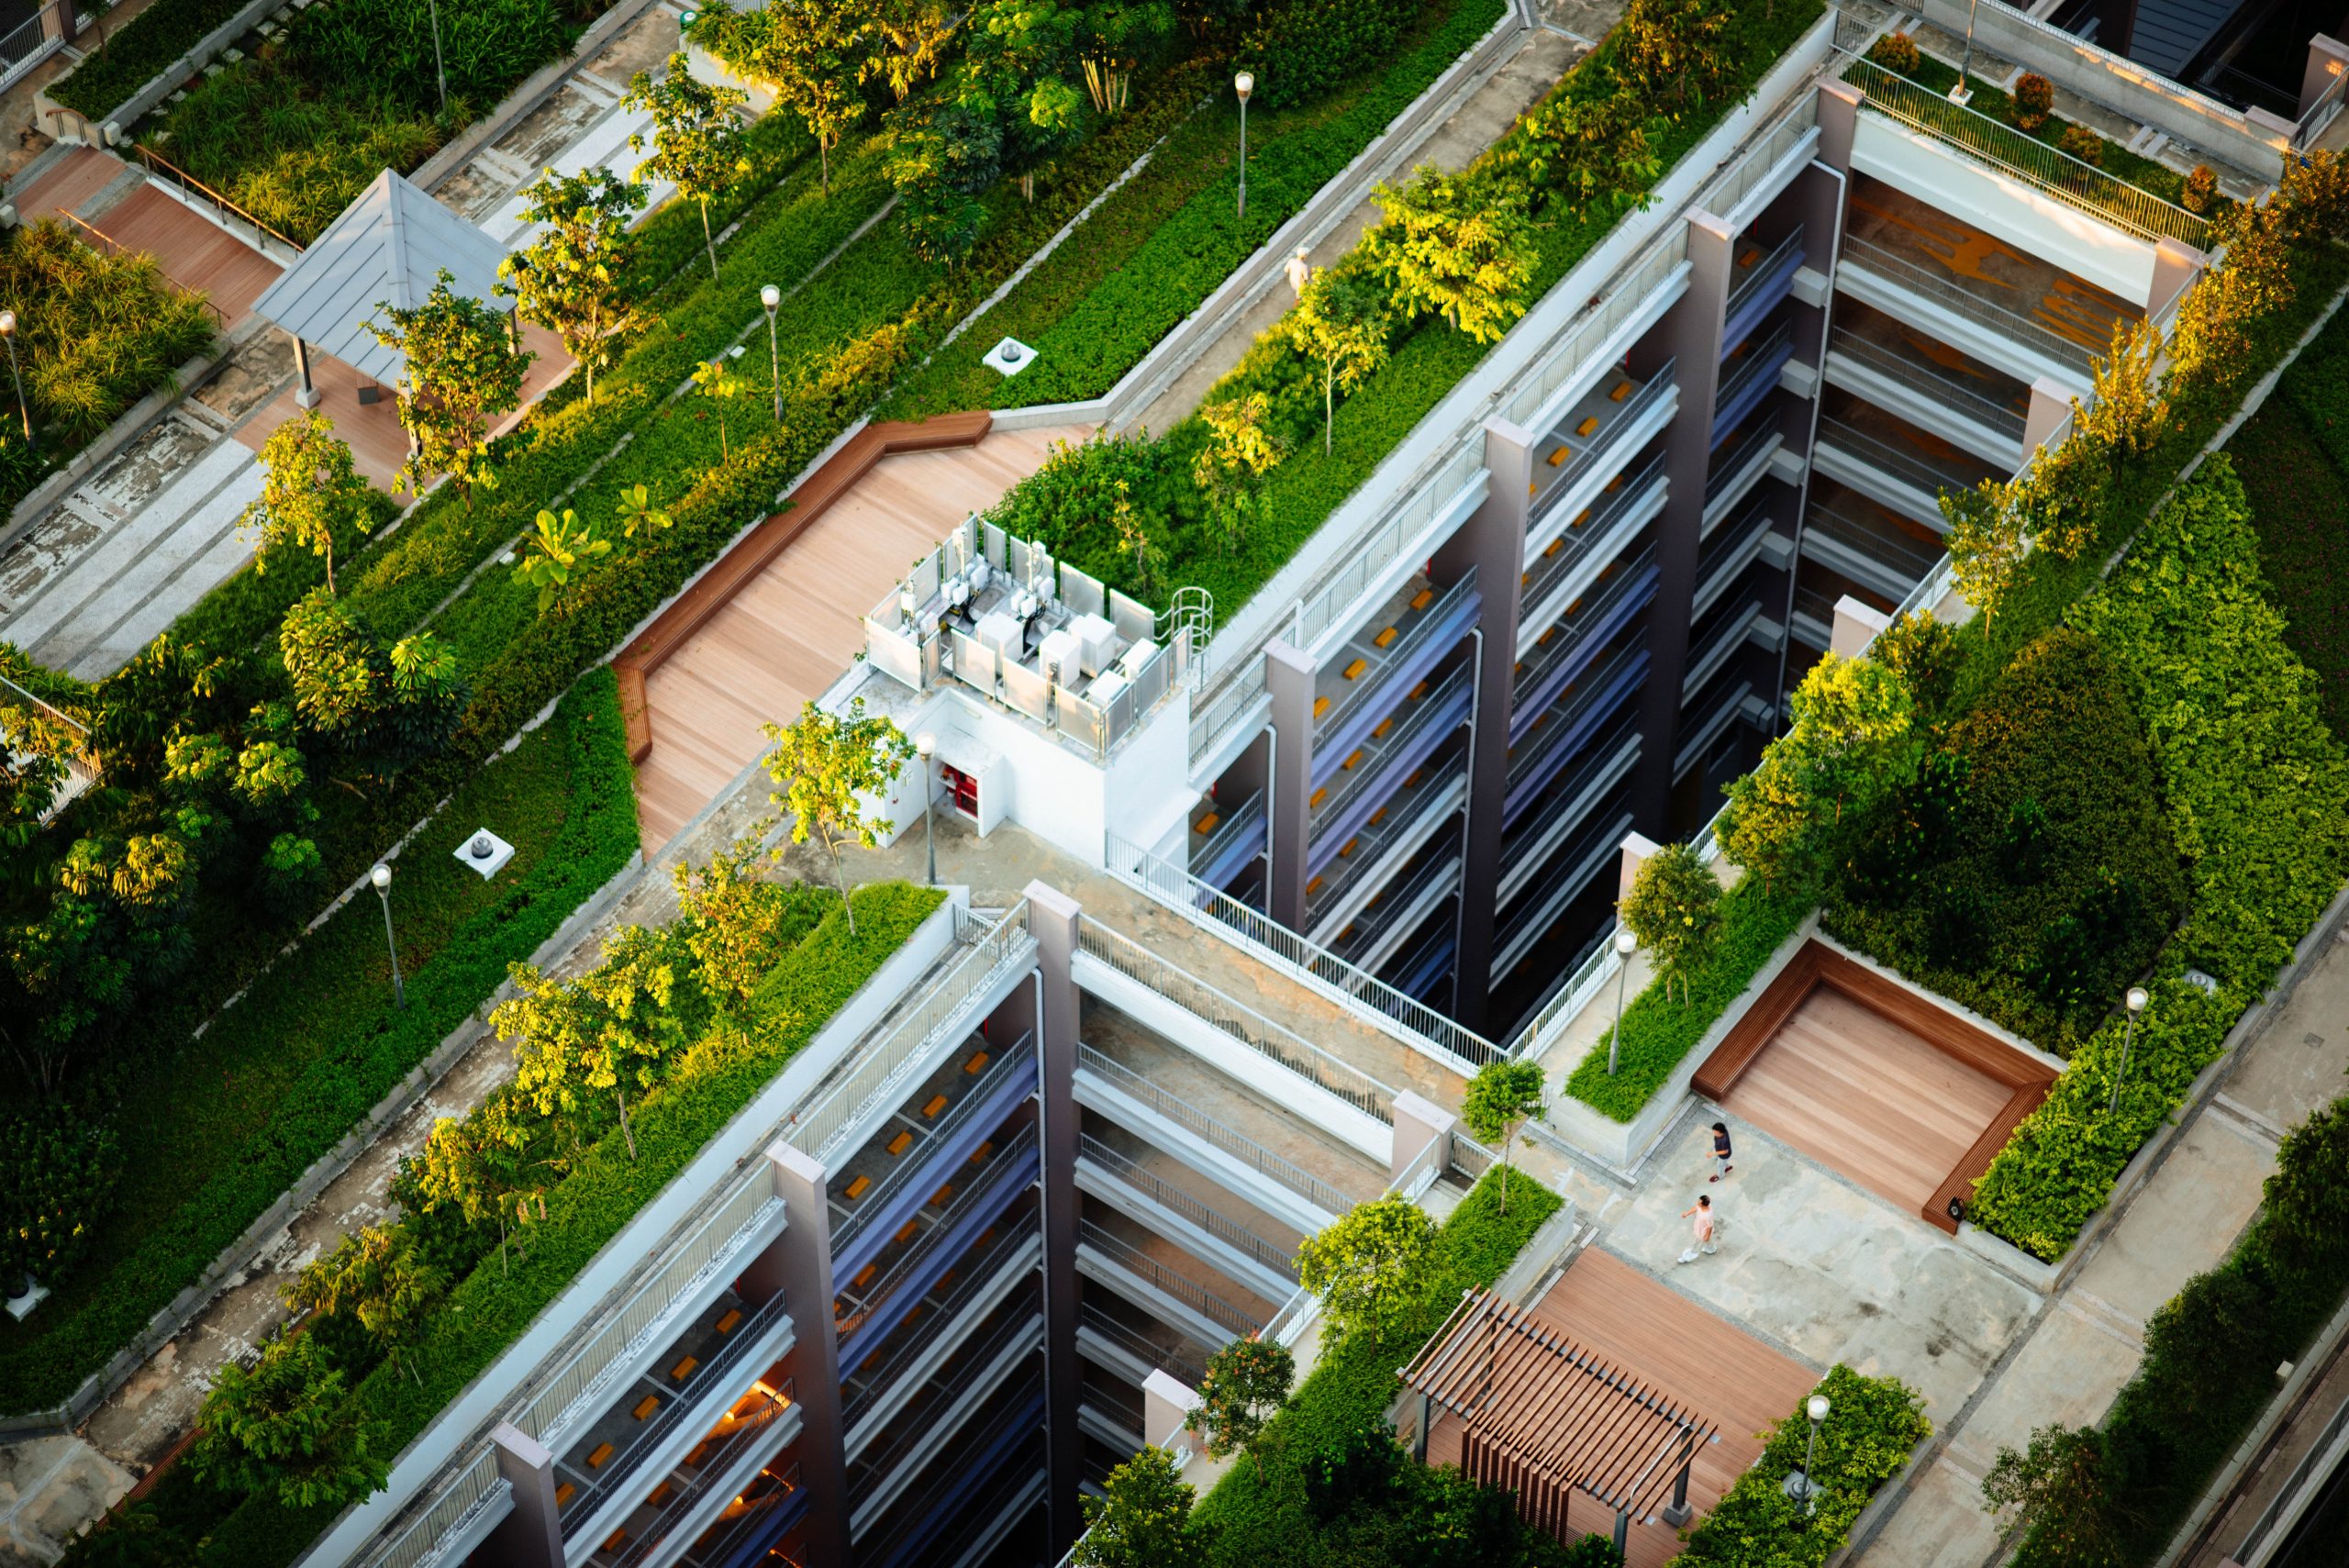 An image of Green Roof Buildings